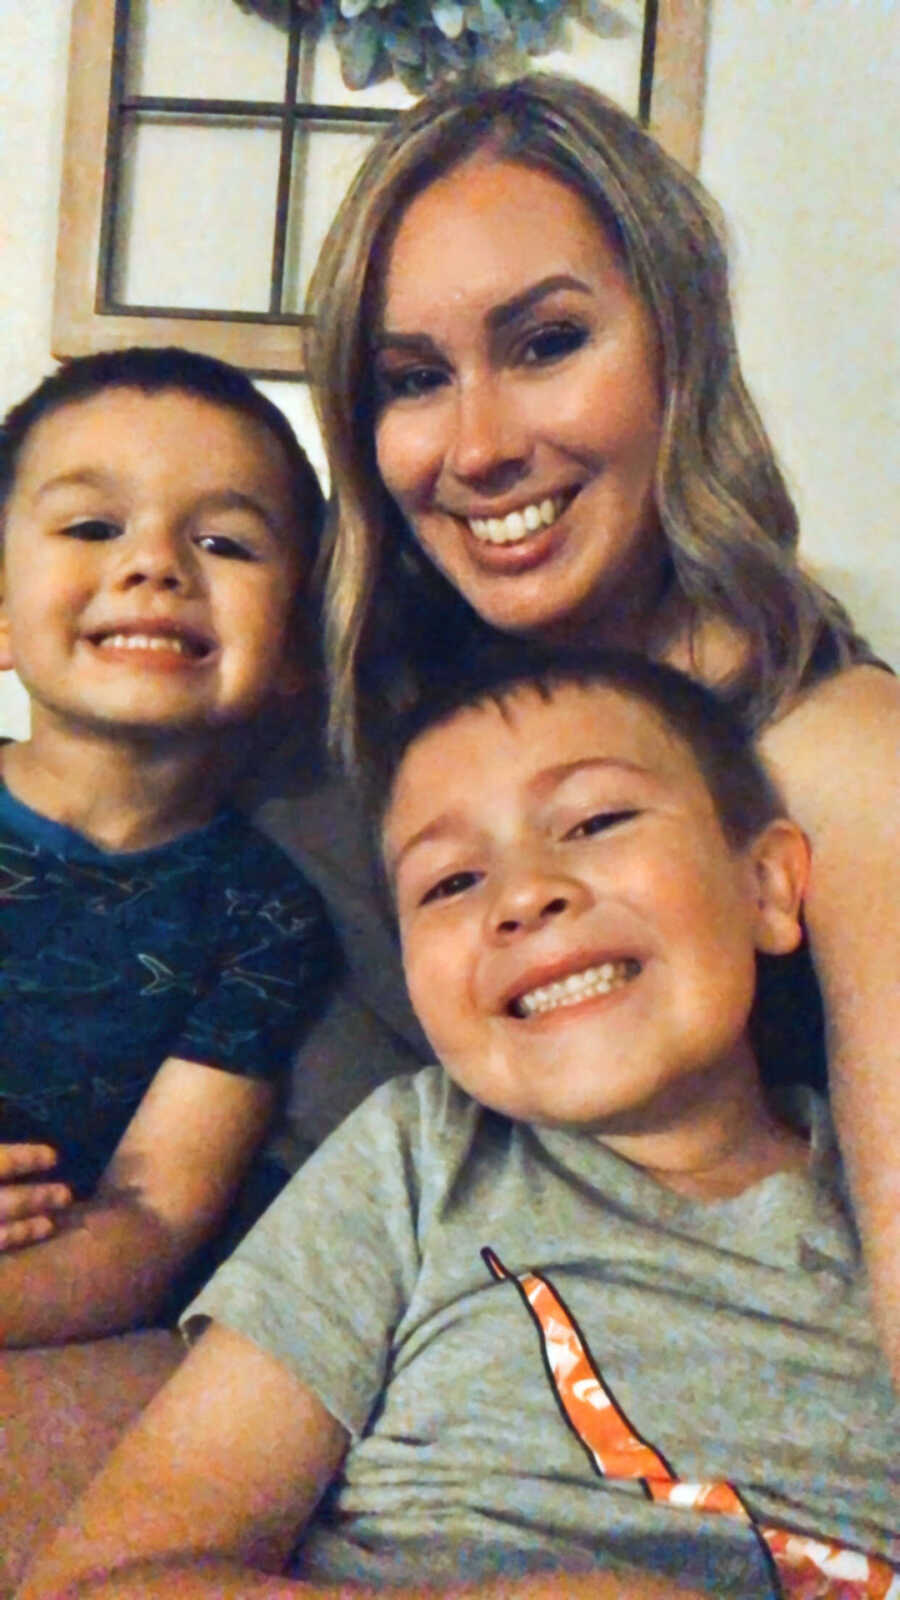 woman with chronic illness and her two younger sons